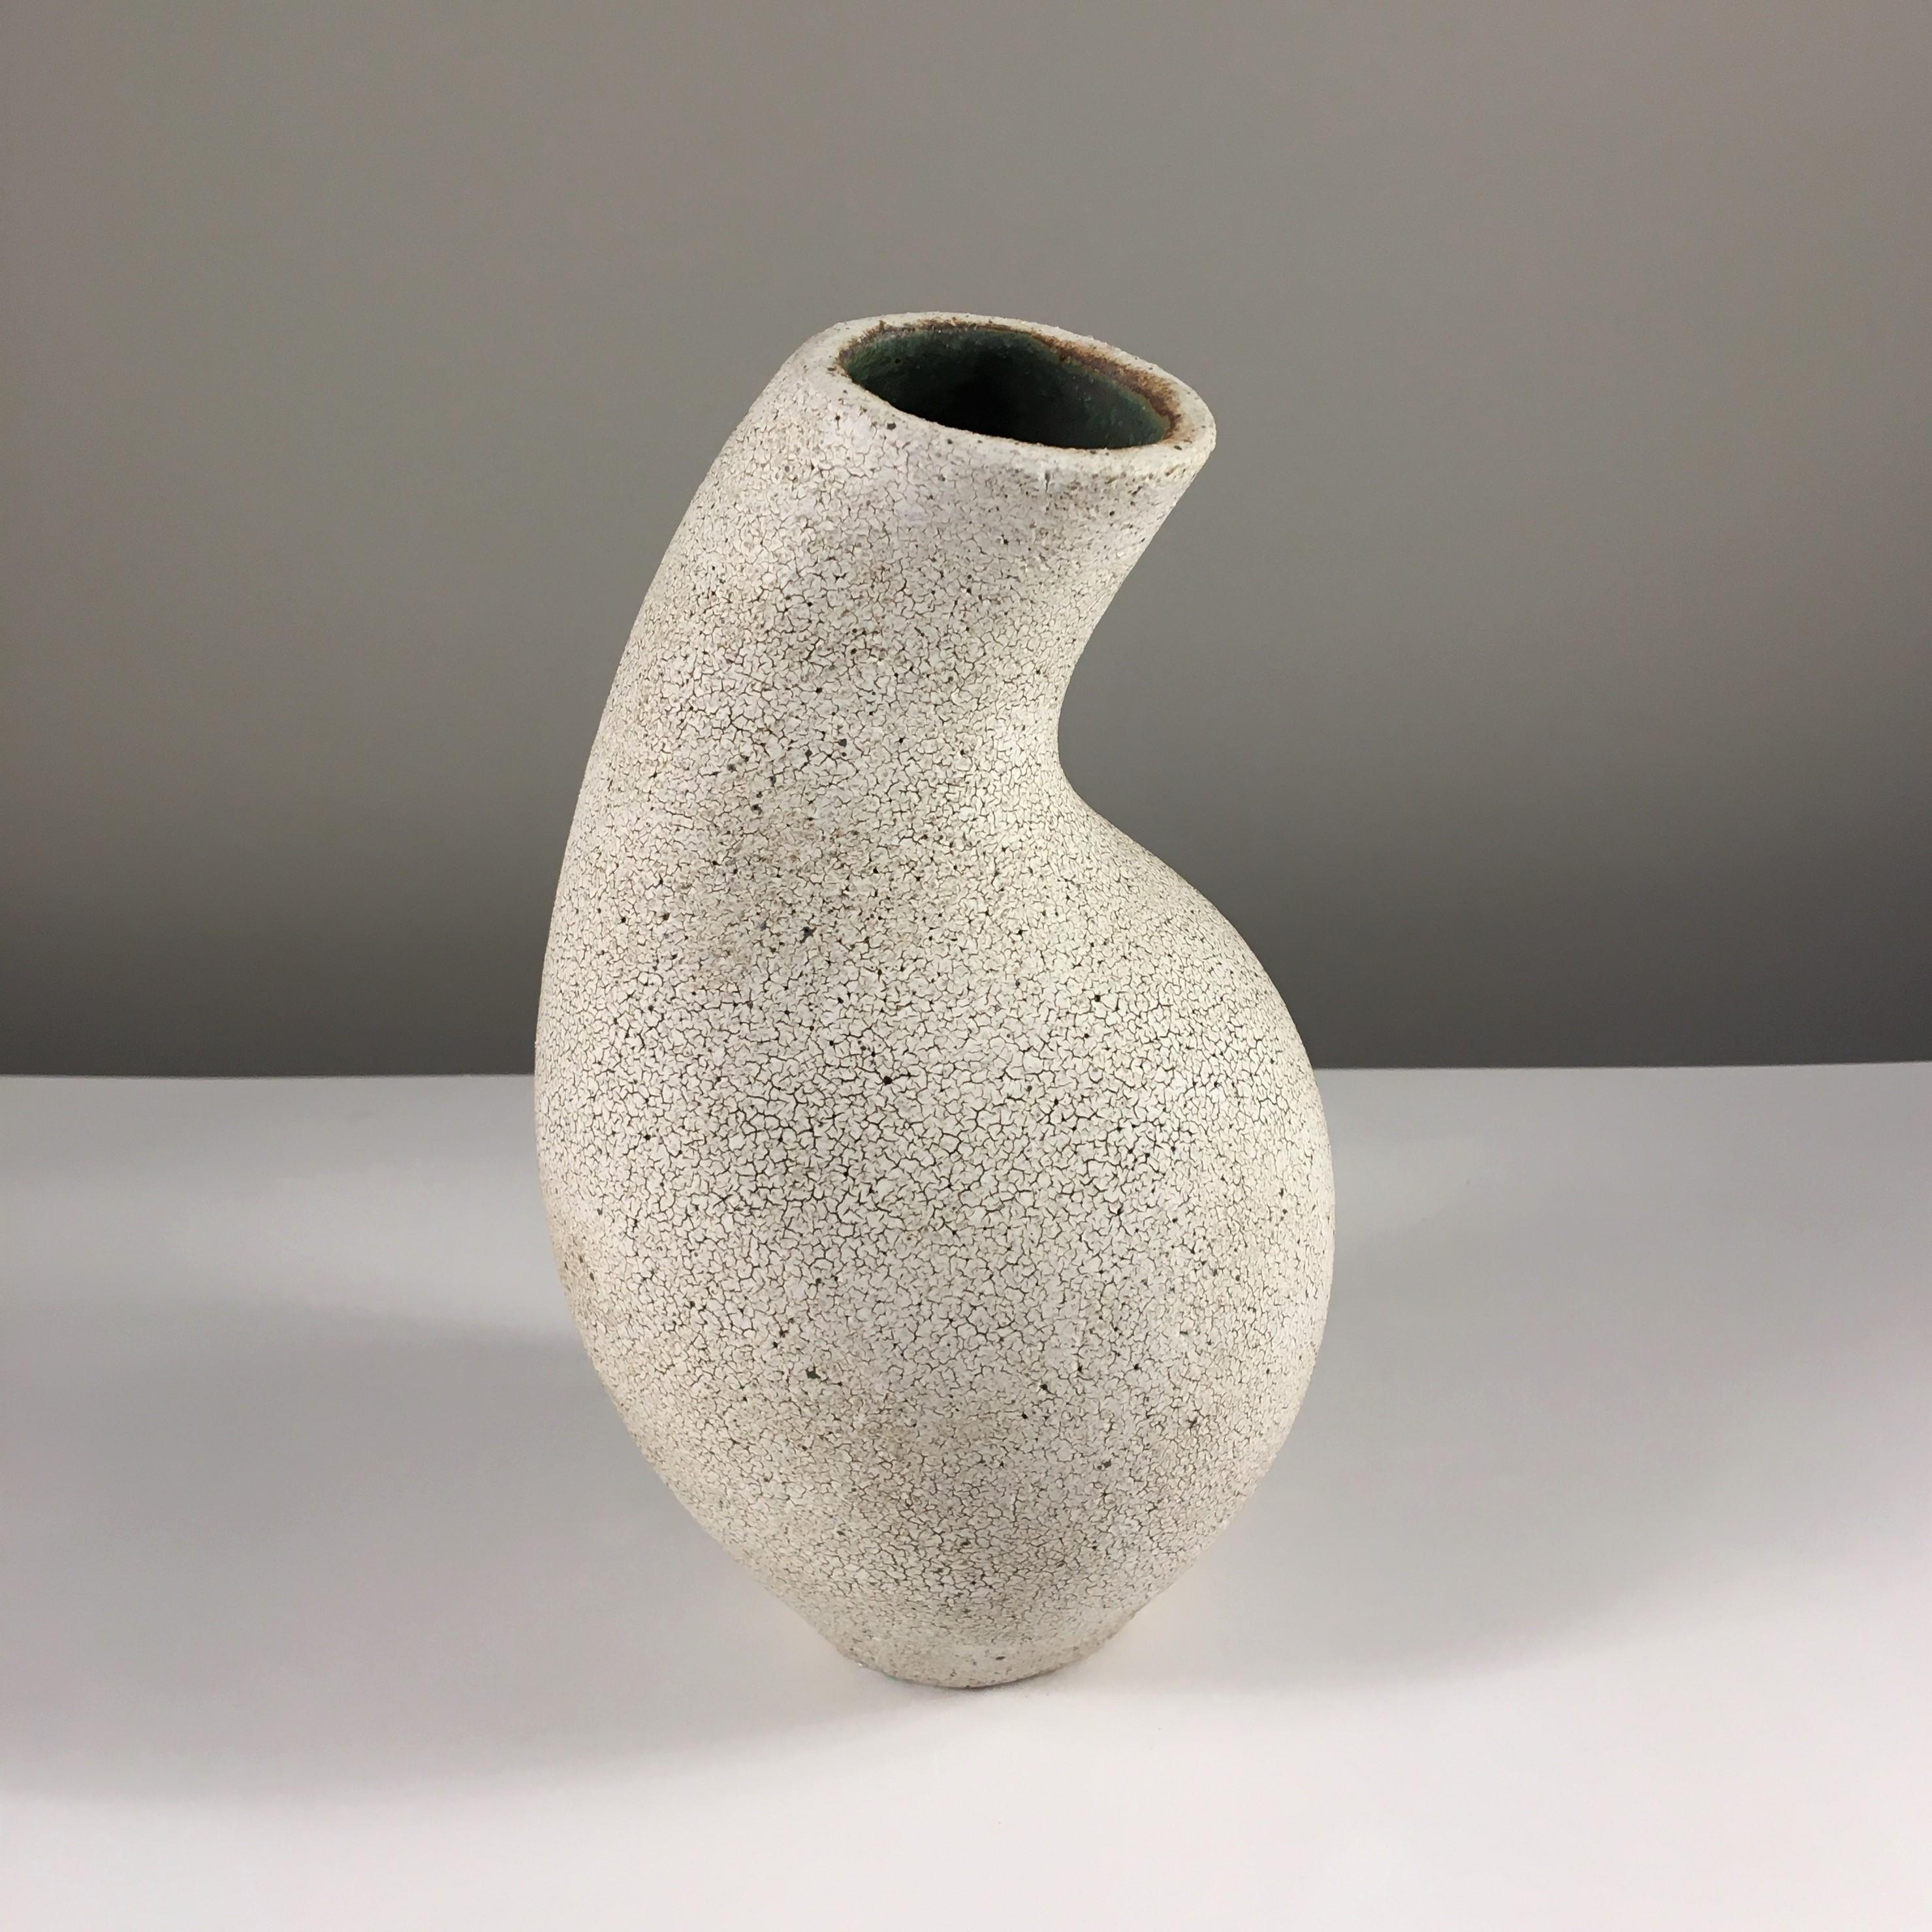 Curved Neck Ceramic Vase by Yumiko Kuga. Measures: Height 8.25